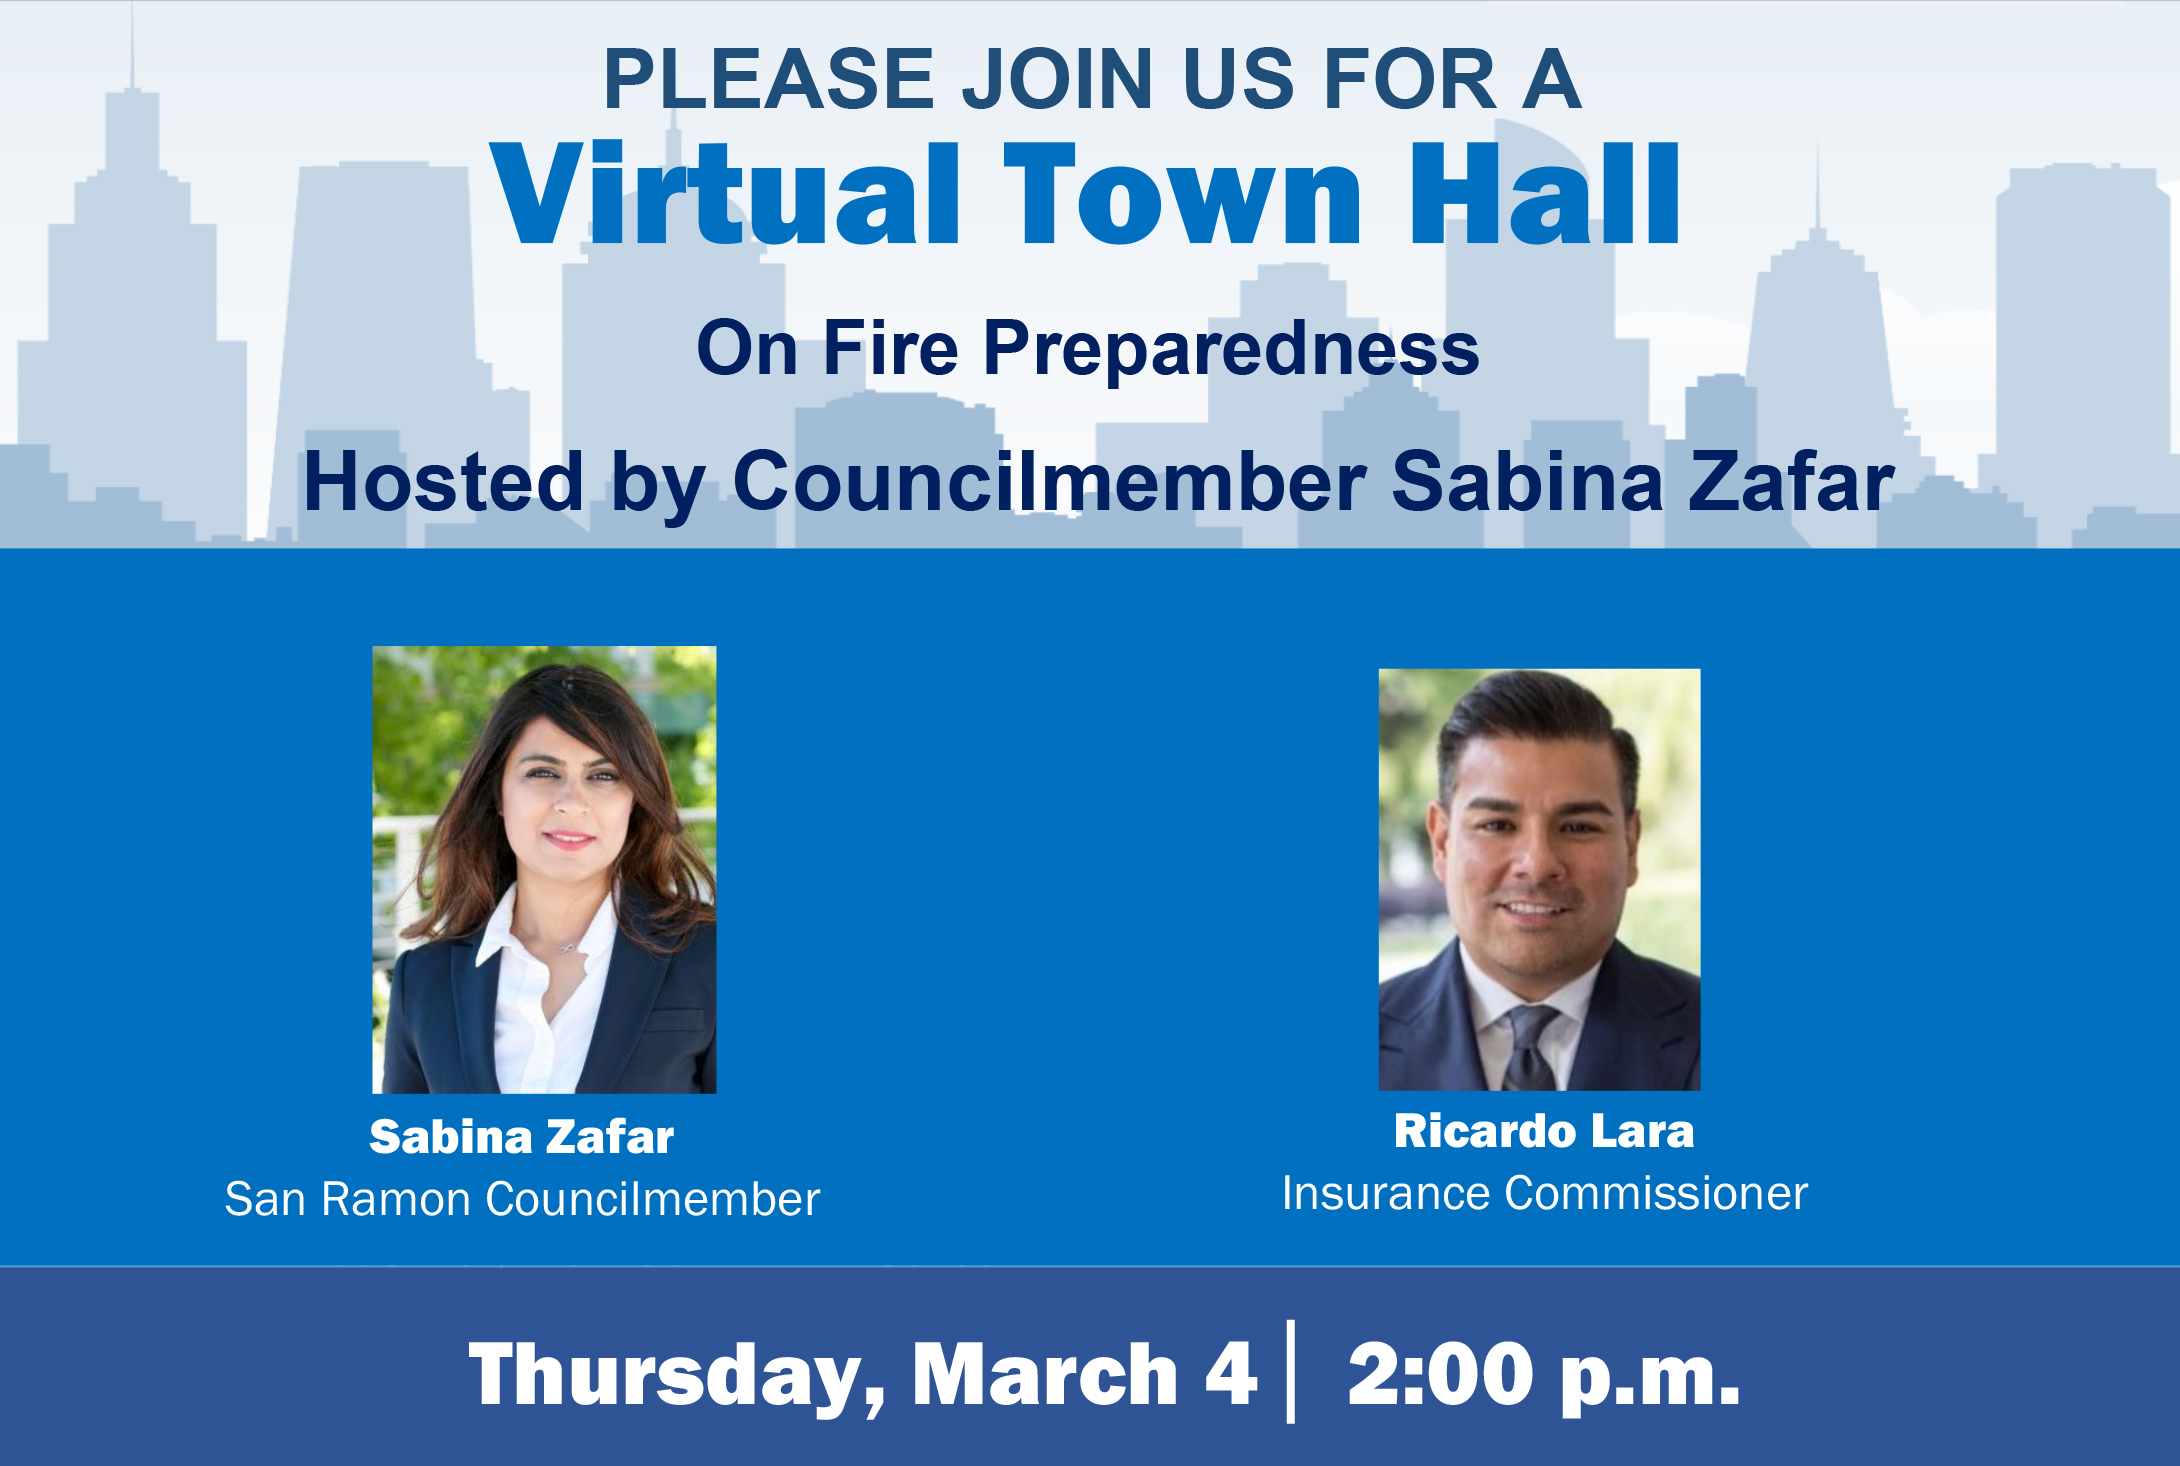 Please join Councilmember Sabina Zafar and CA Insurance Commissioner Ricardo Lara for a fire preparedness virtual town hall on insurance issues and available resources for homeowners. The event will be held on: Thursday, March 4, 2:00 p.m. to 3:00 p.m.